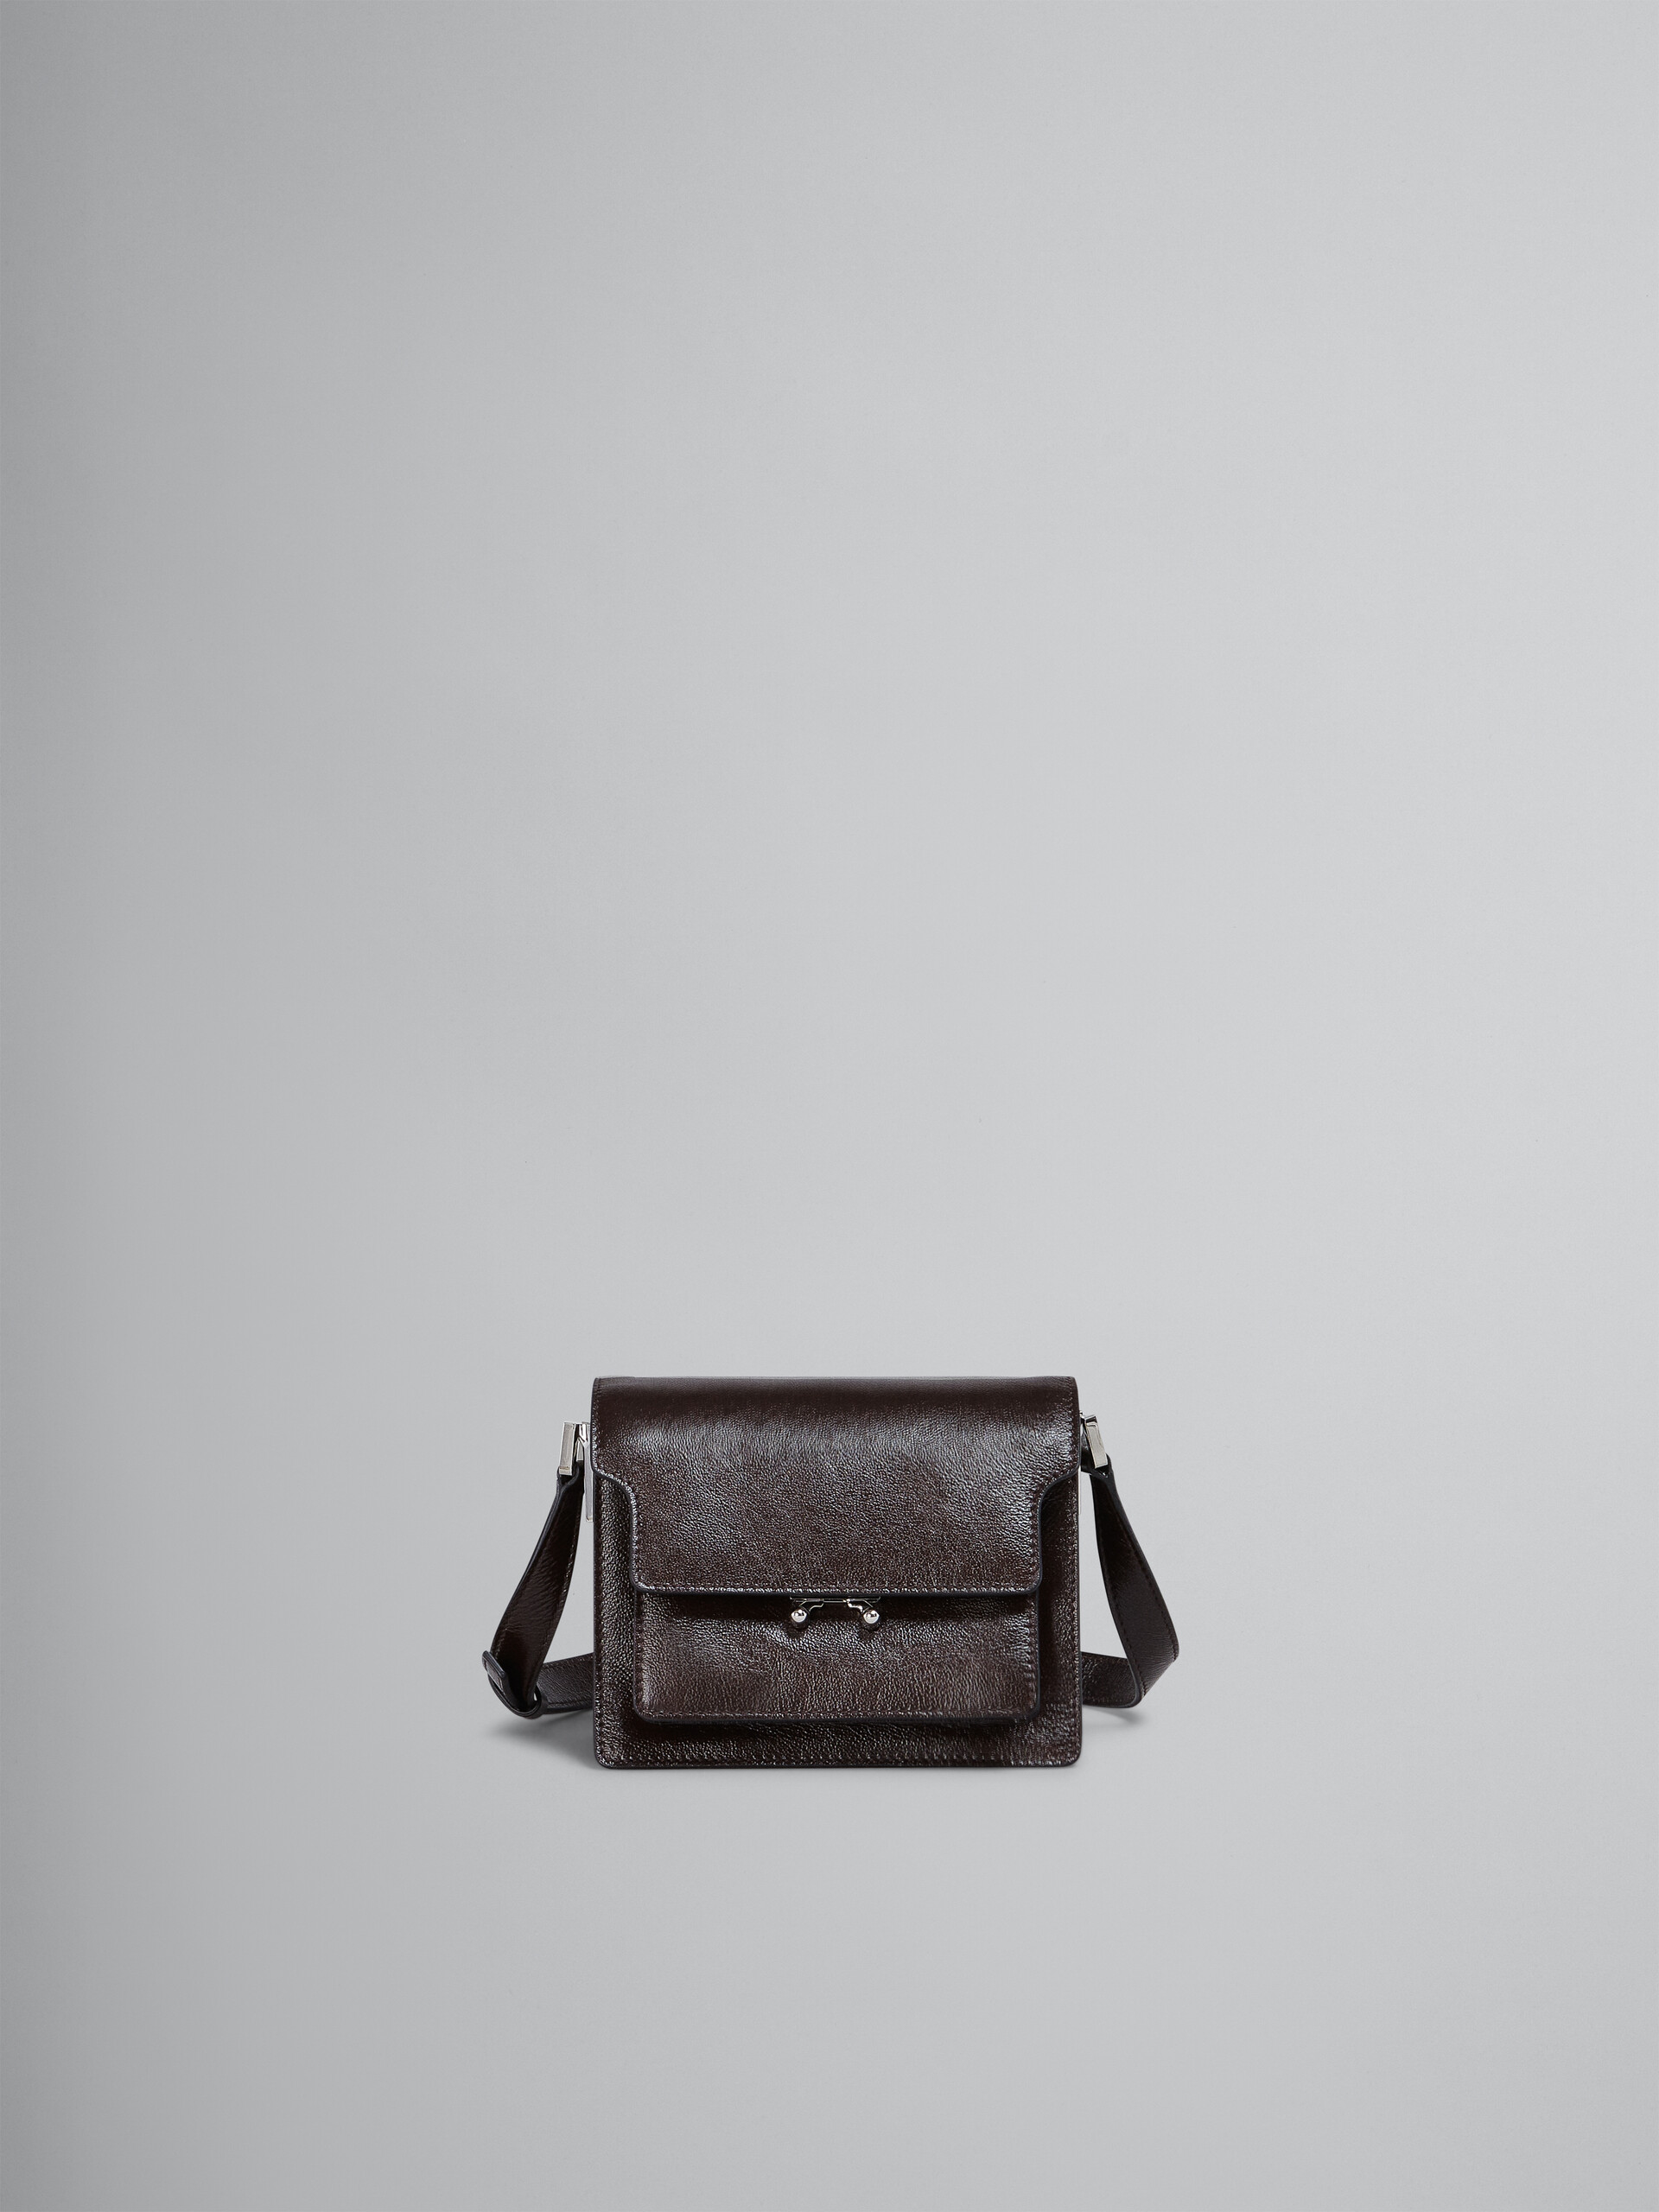 TRUNK SOFT mini bag in brown leather - Shoulder Bags - Image 1